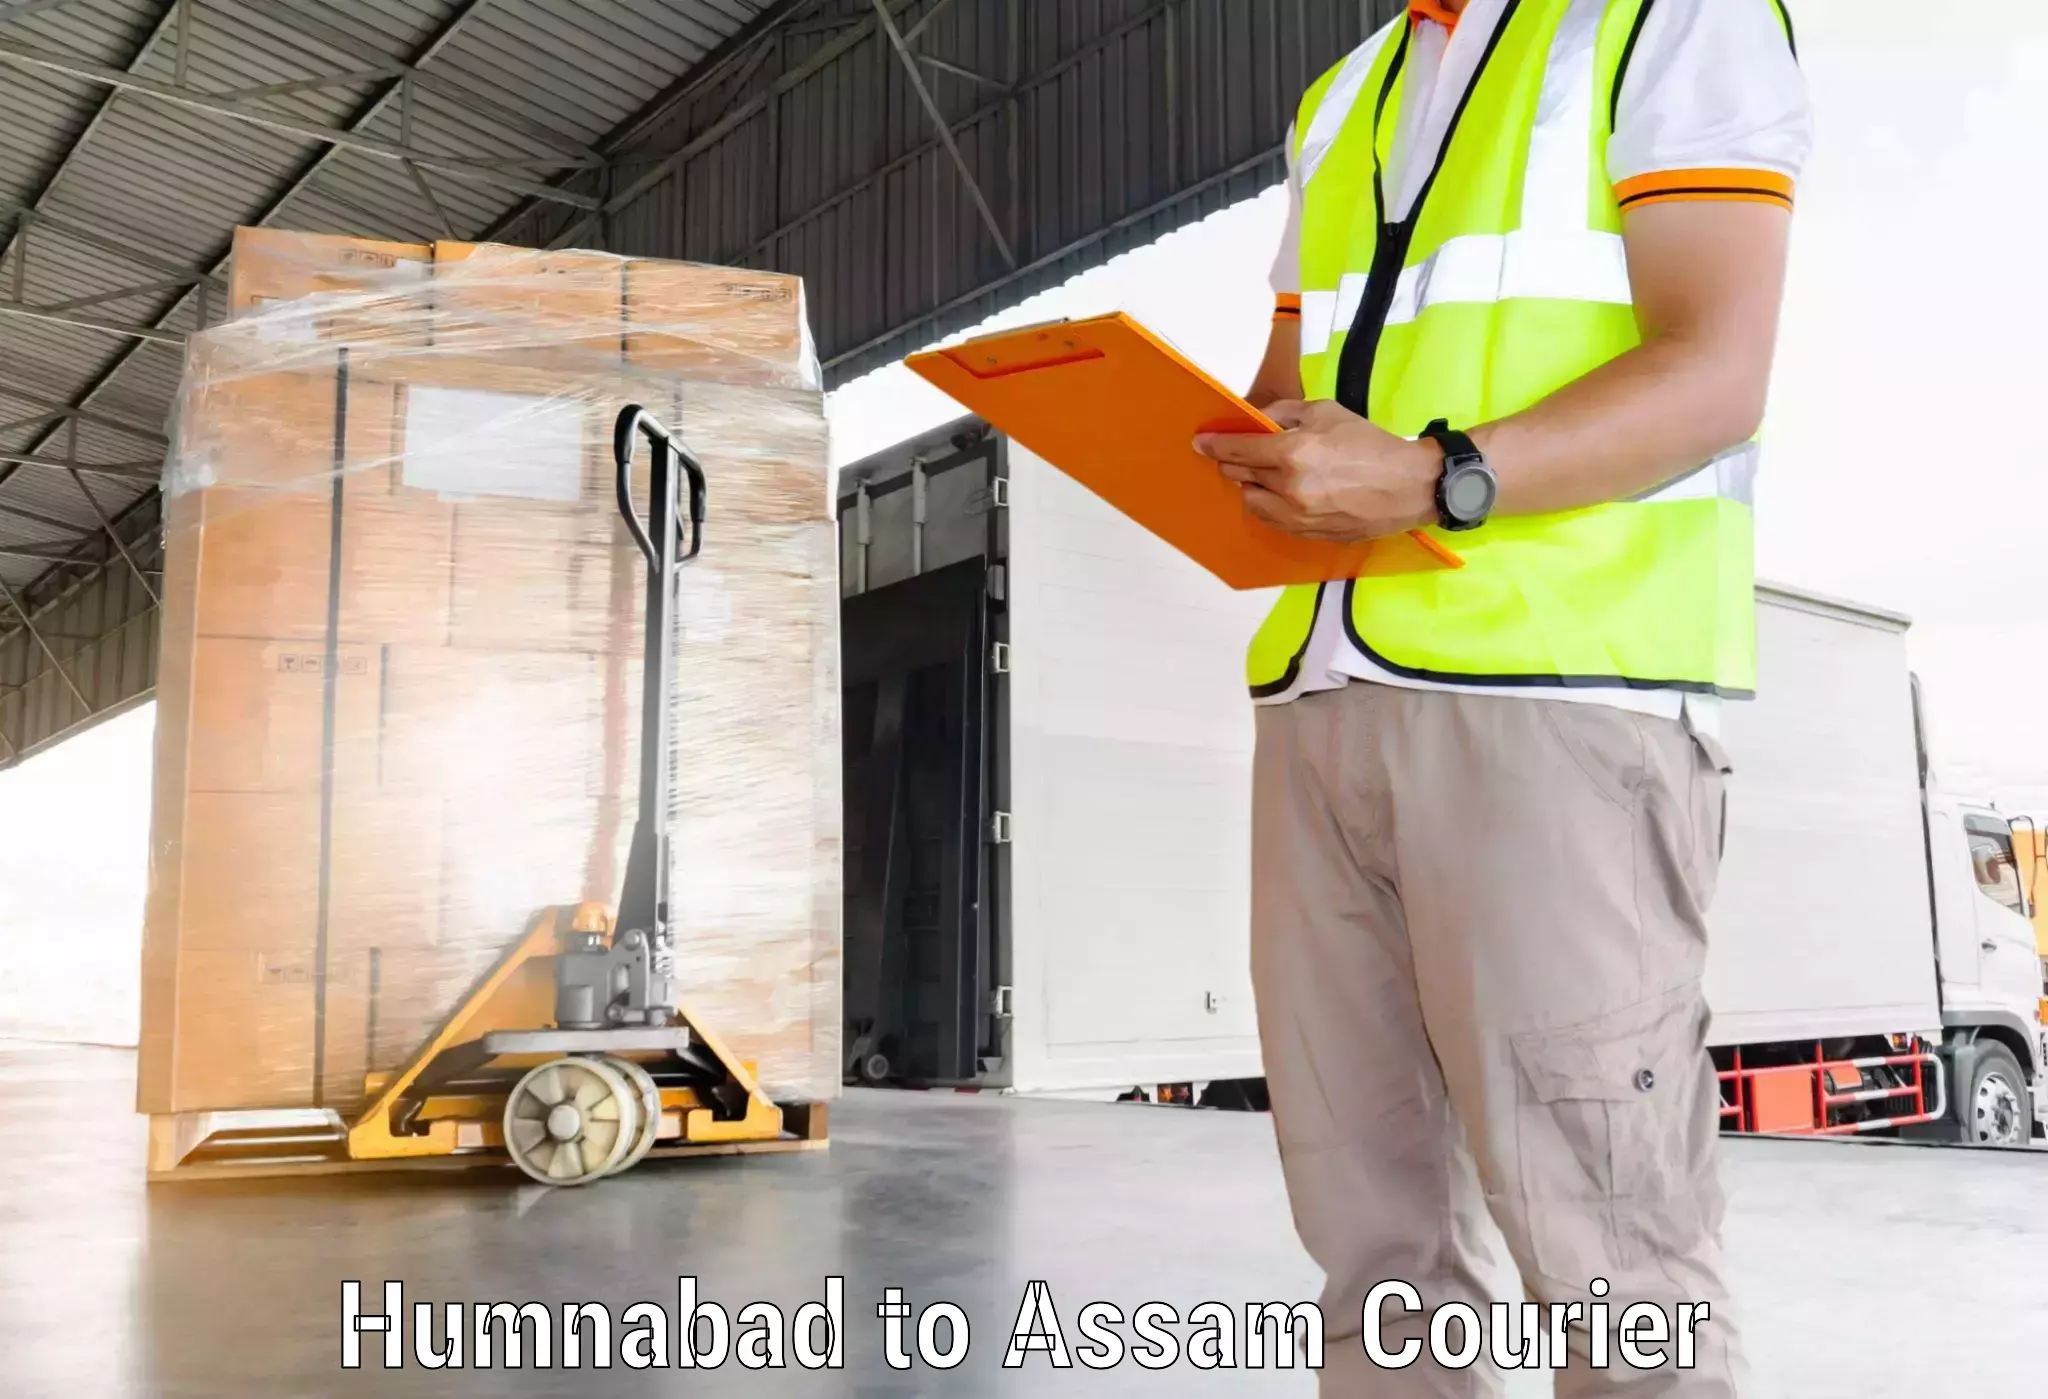 Advanced courier platforms Humnabad to Rupai Siding